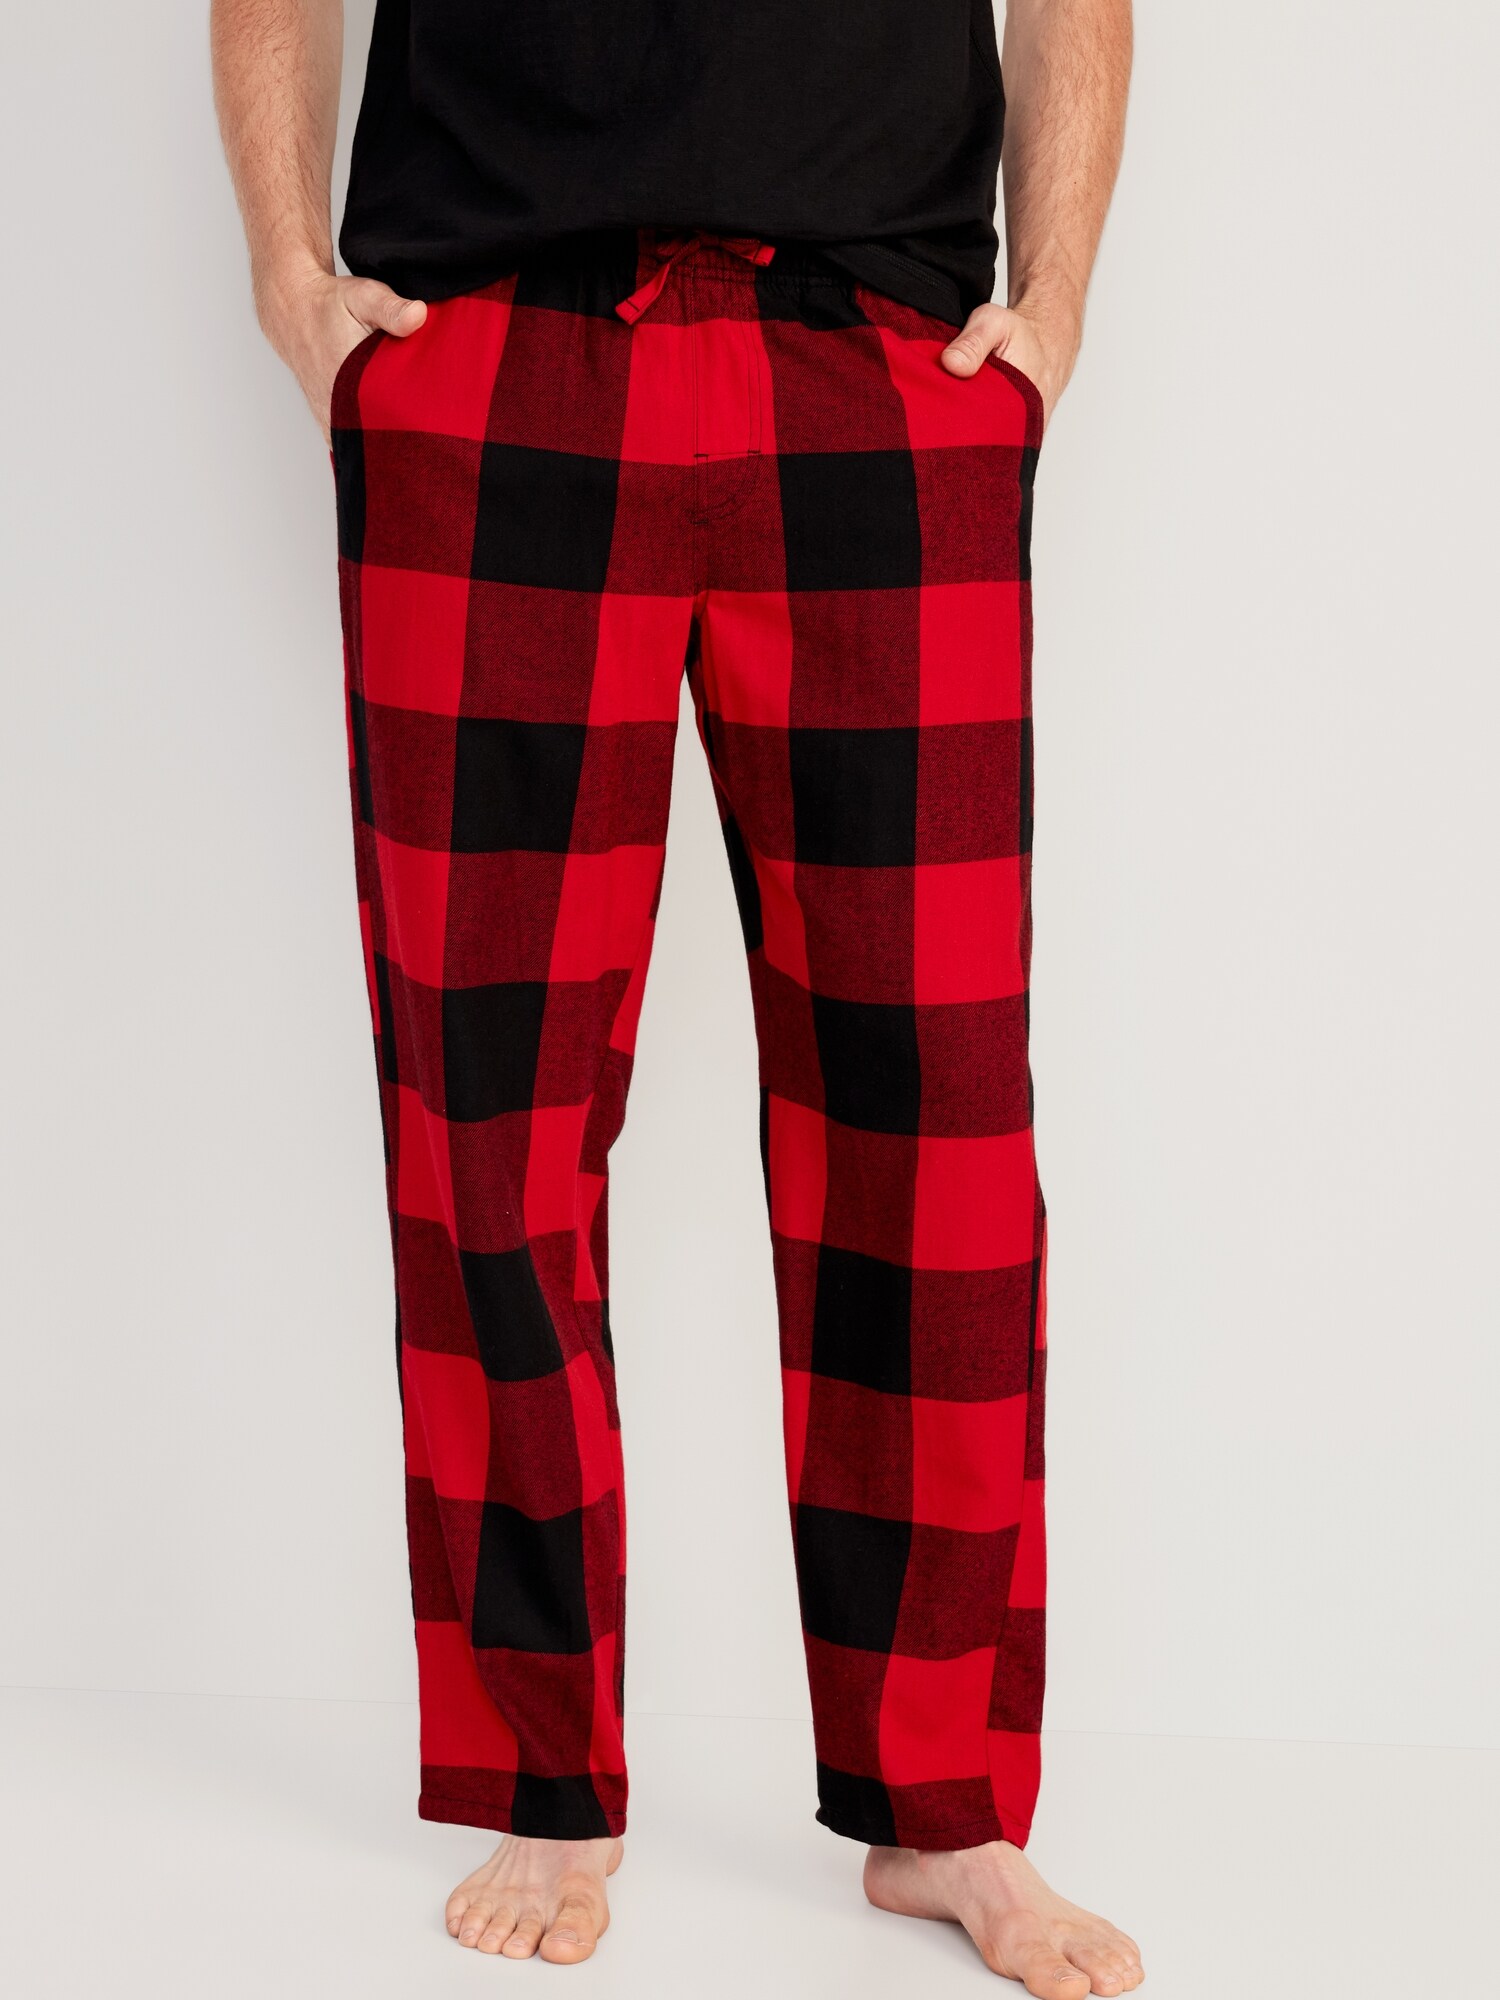 Matching Flannel Pajama Pants 2-Pack for Men | Old Navy